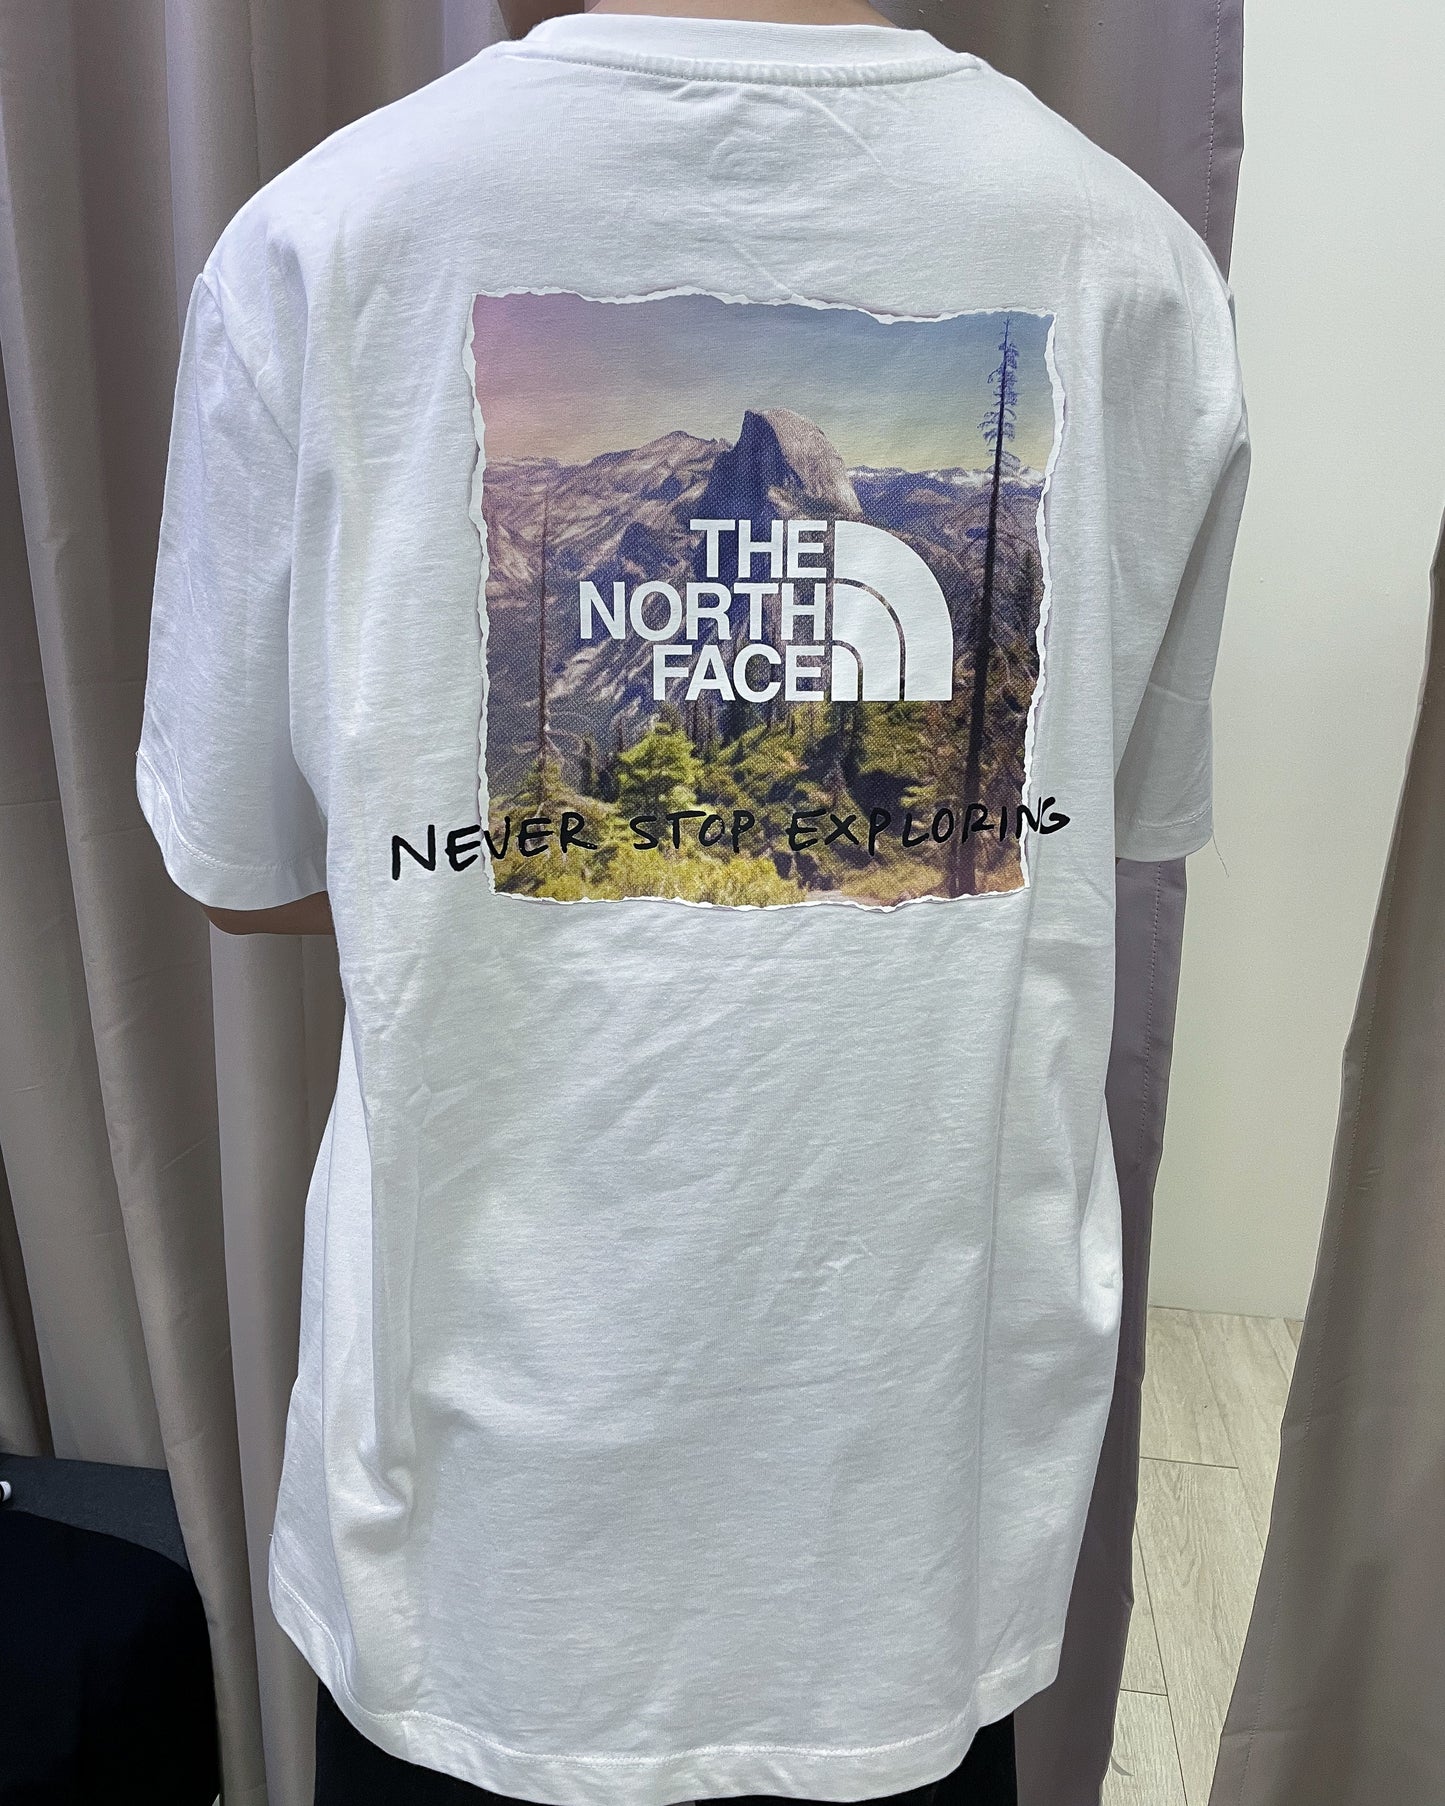 The North Face Never stop exploring T-Shirt ( White )